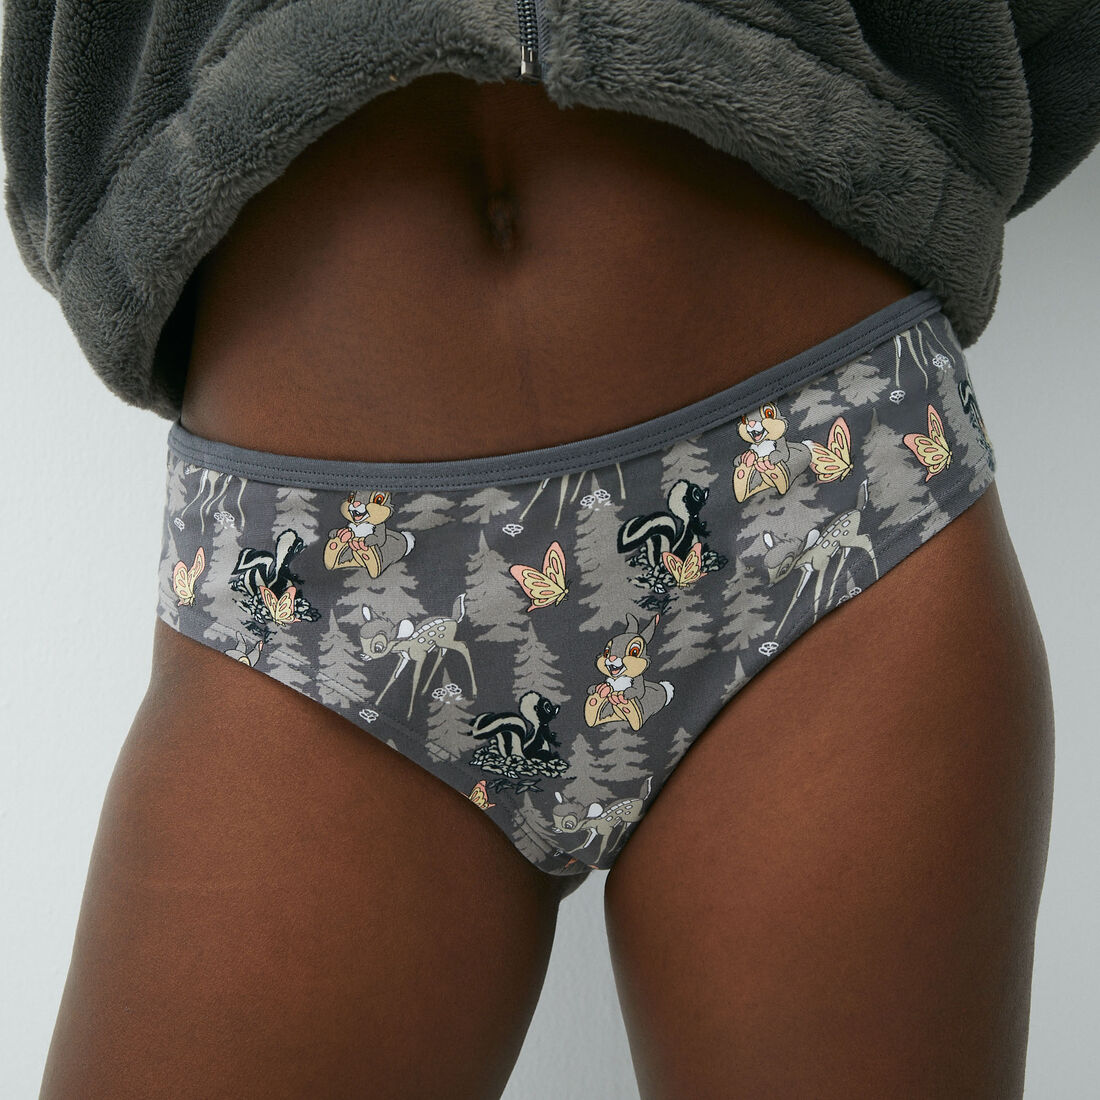 printed hipsters with Bambi character prints;